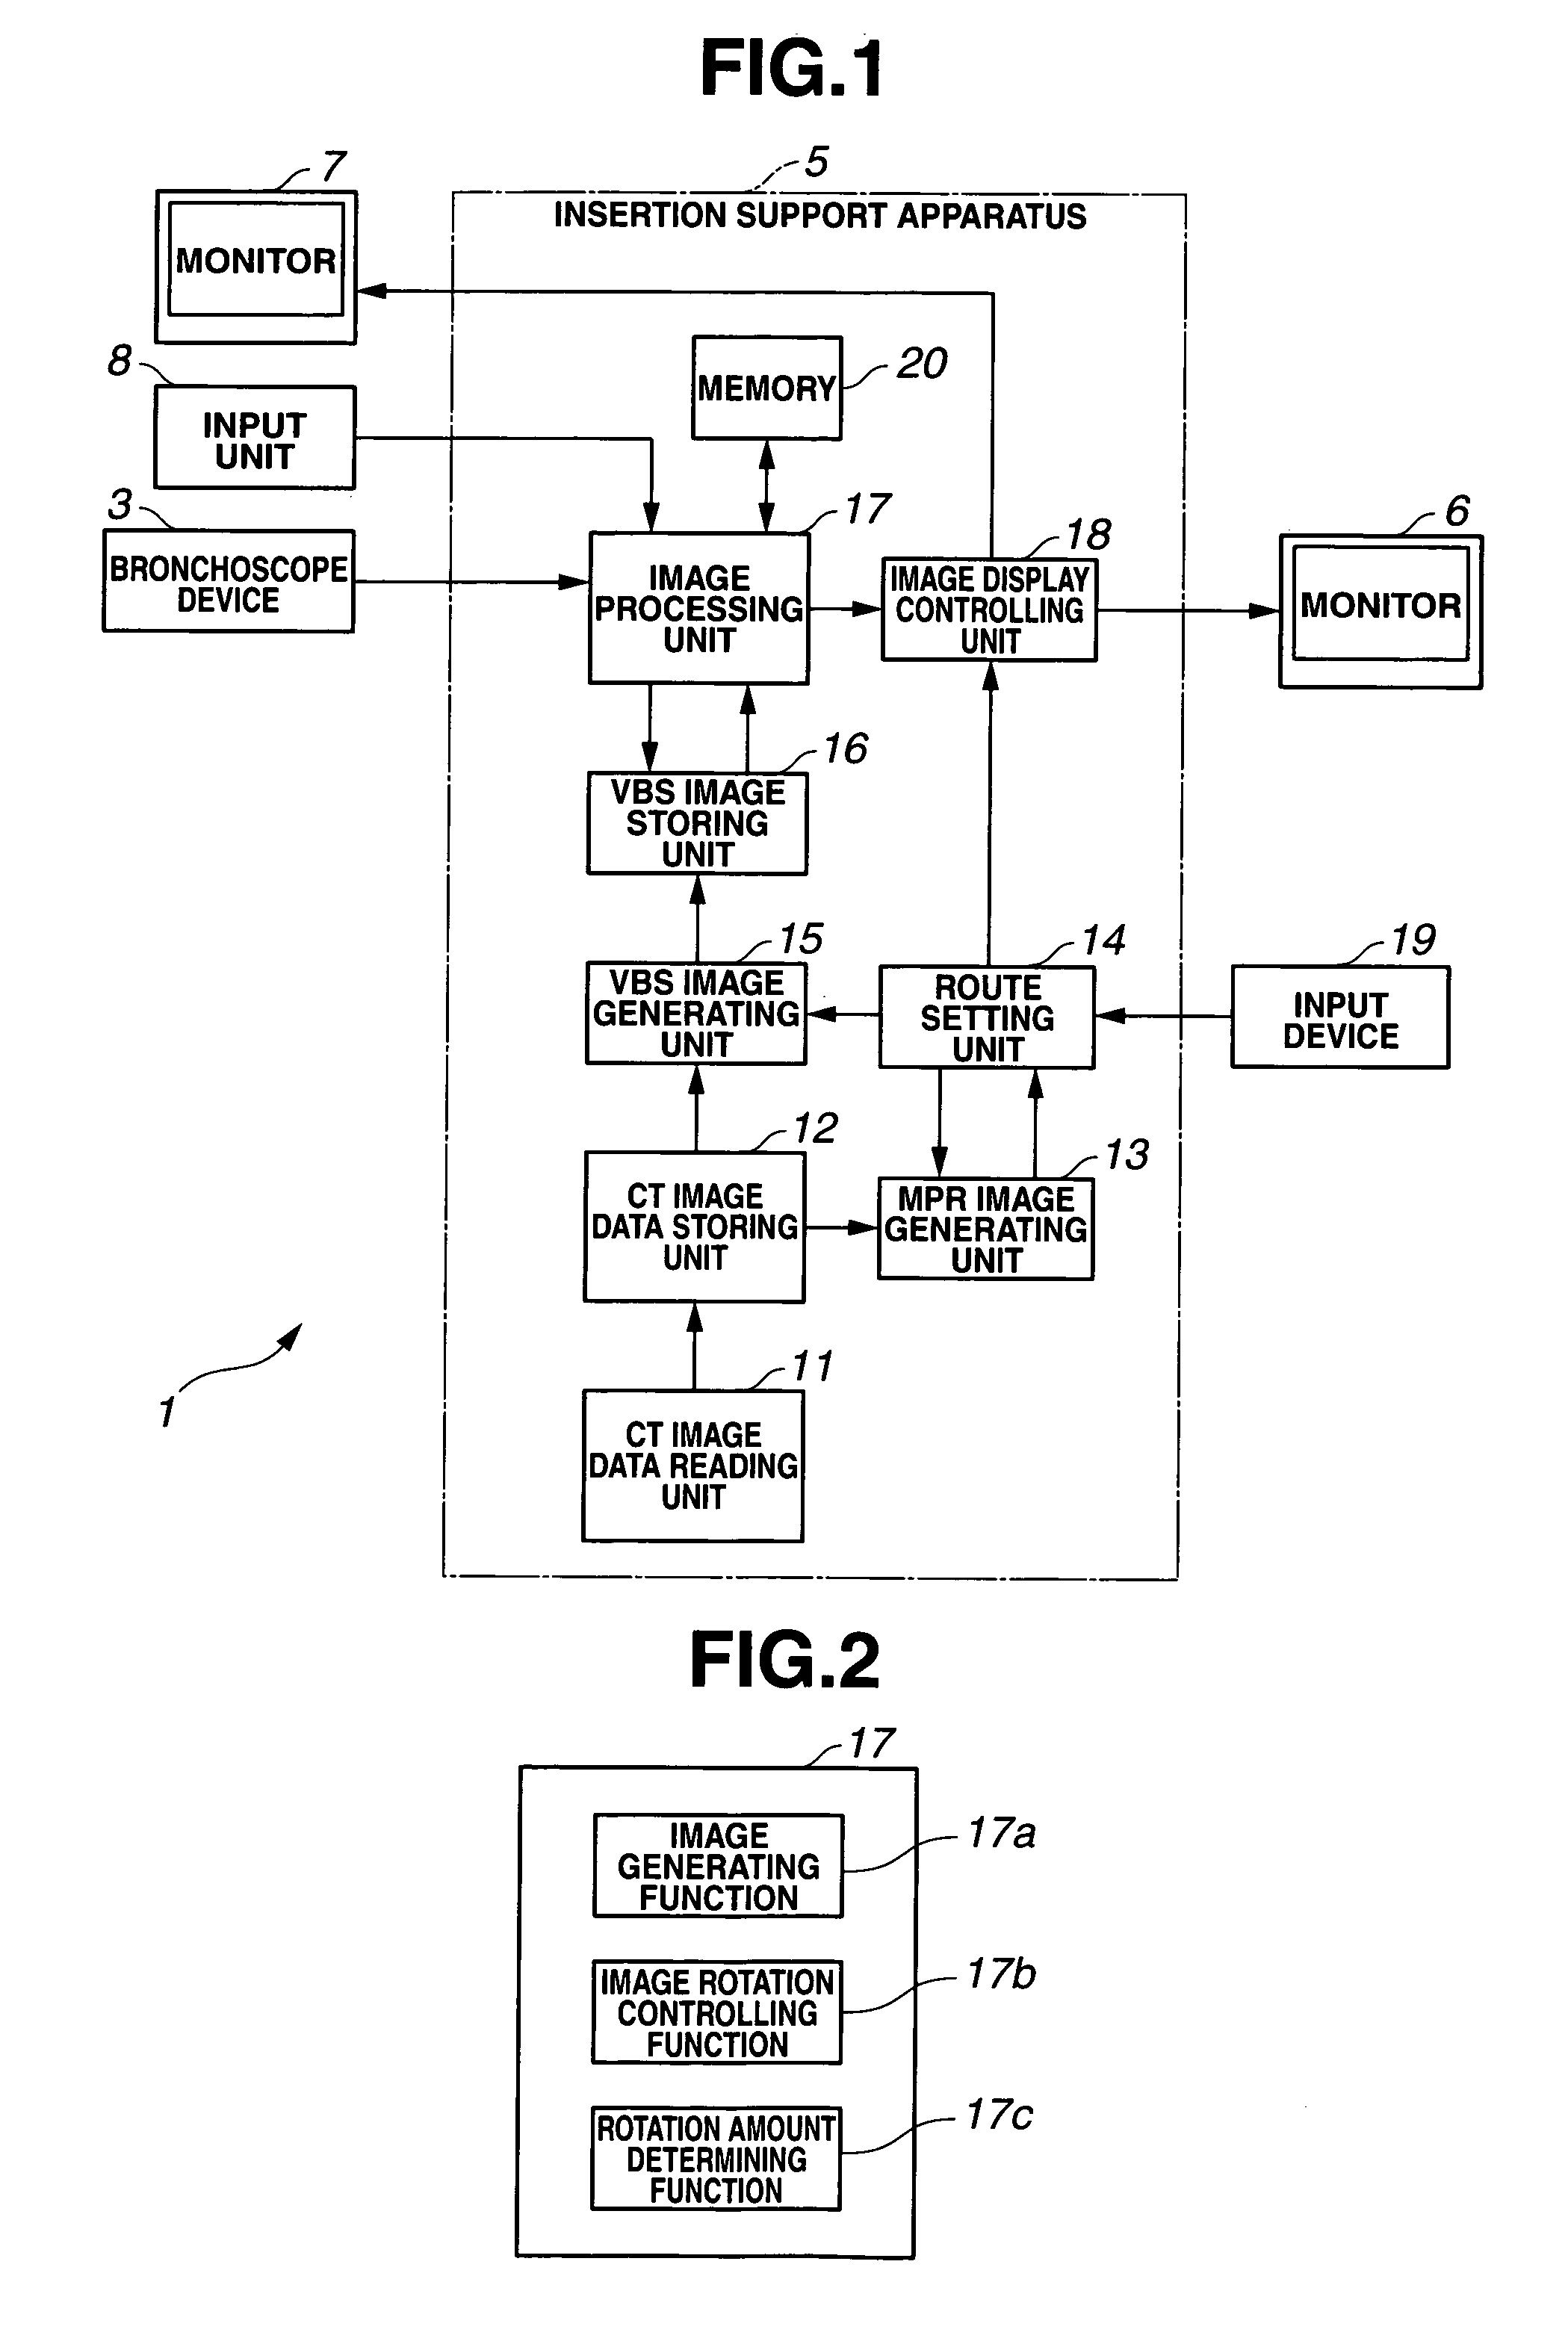 Insertion support system for producing imaginary endoscopic image and supporting insertion of bronchoscope